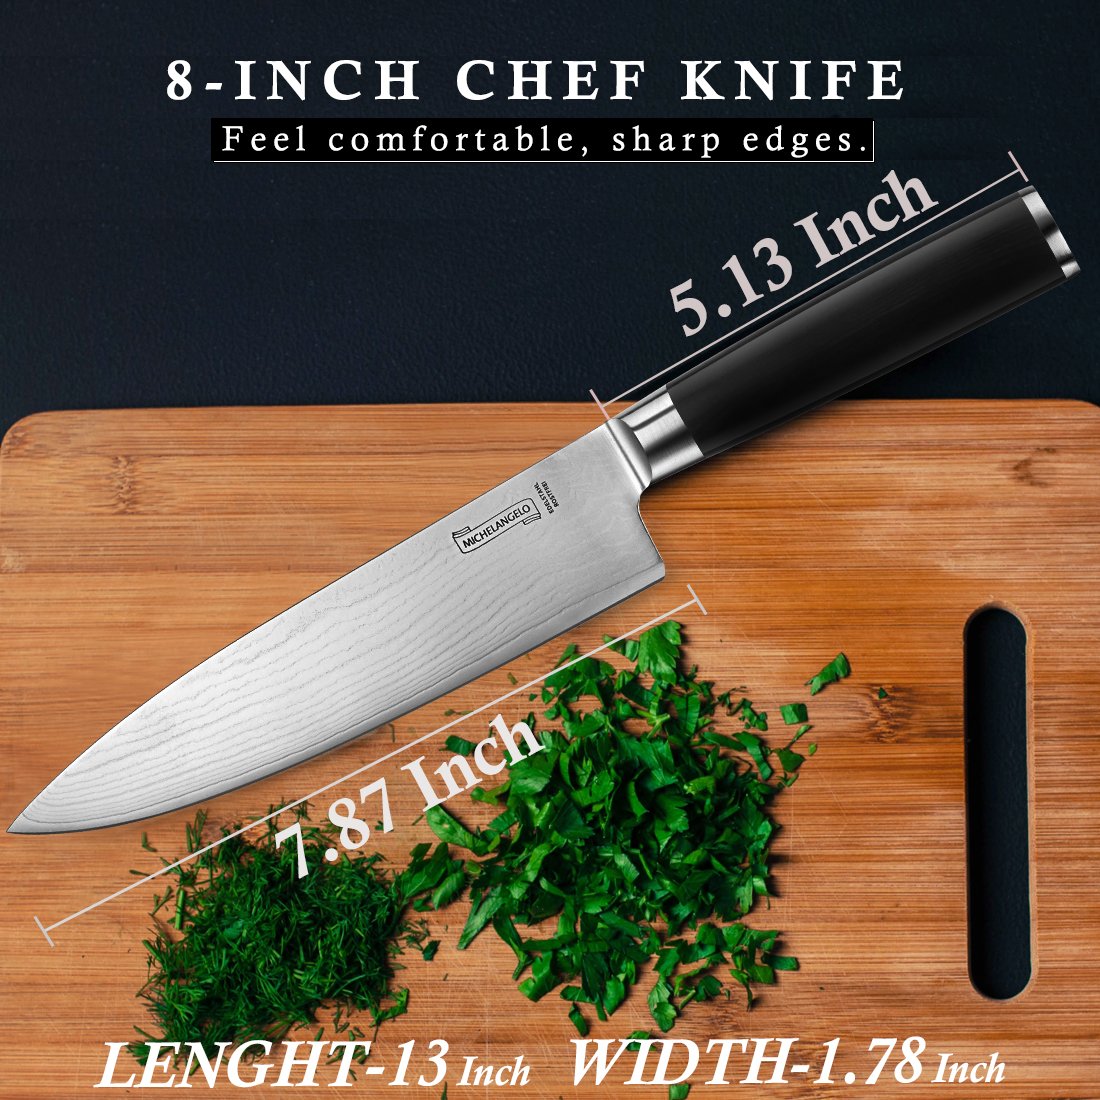 MICHELANGELO Professional Chef Knife 8 Inch Pro, German High Carbon Stainless Steel with Ergonomic Handle, Japanese Knife, for Kitchen - Inch, Etched Damascus Pattern